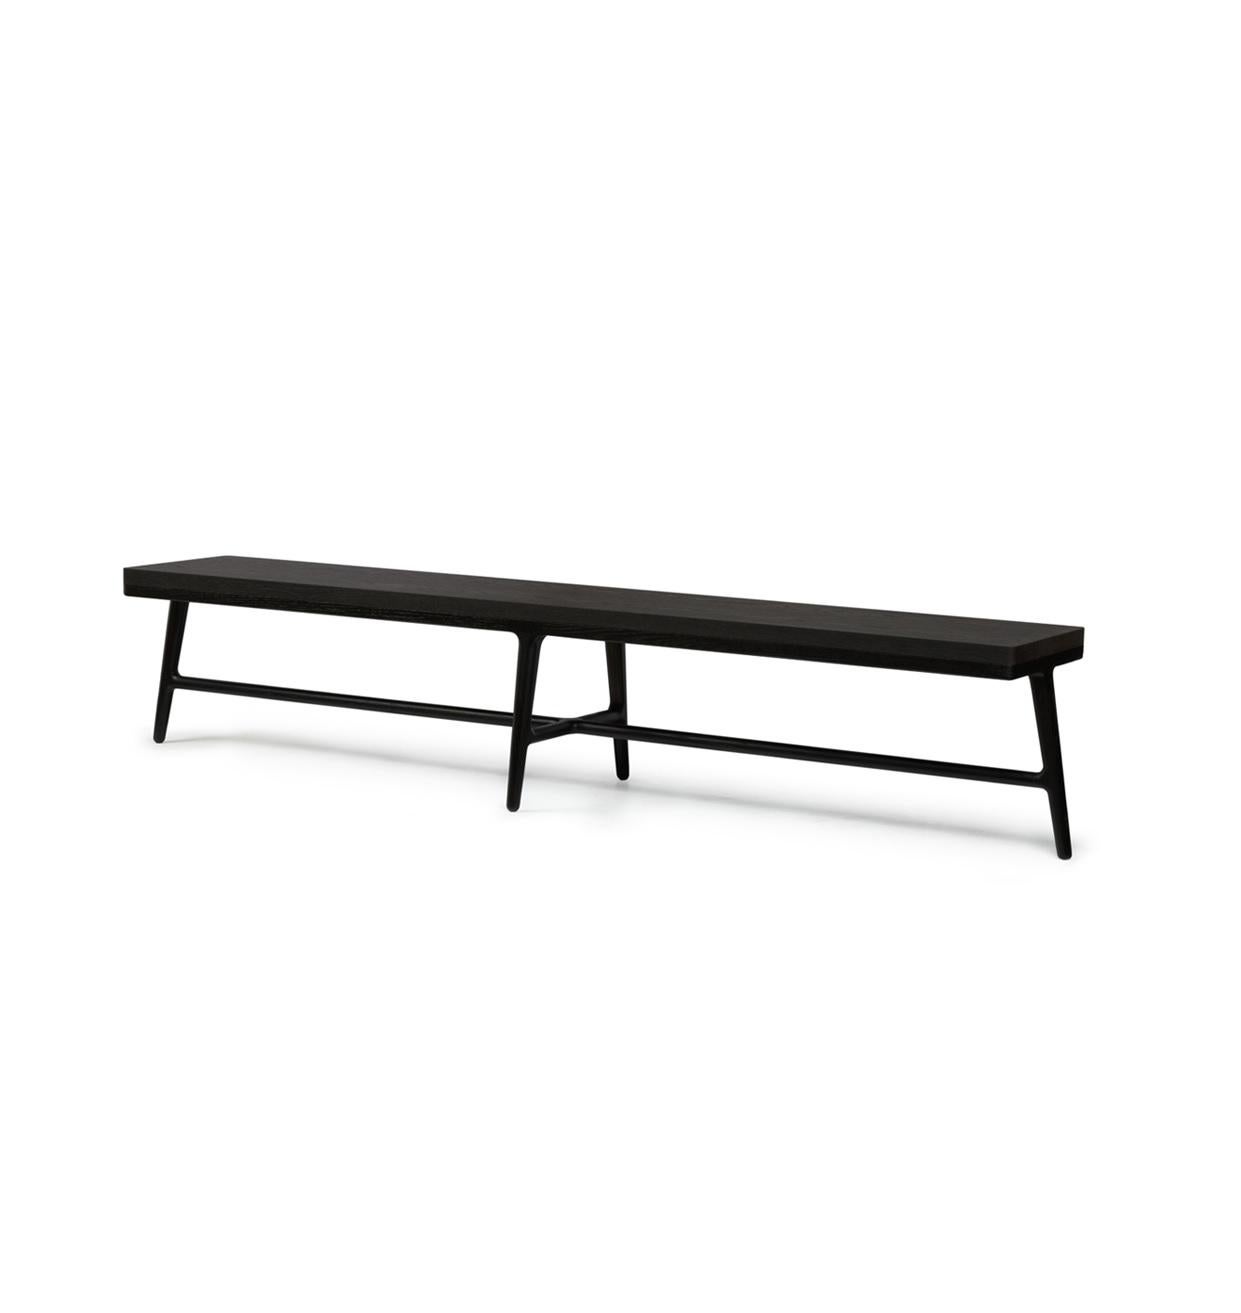 Anatole bench by LK Edition
Dimensions: 220 x 45 x H 43 cm
Materials: Black oak. 


It is with the sense of detail and requirement, this research of the exception by the selection of noble materials and his culture of the French know-how, that LK